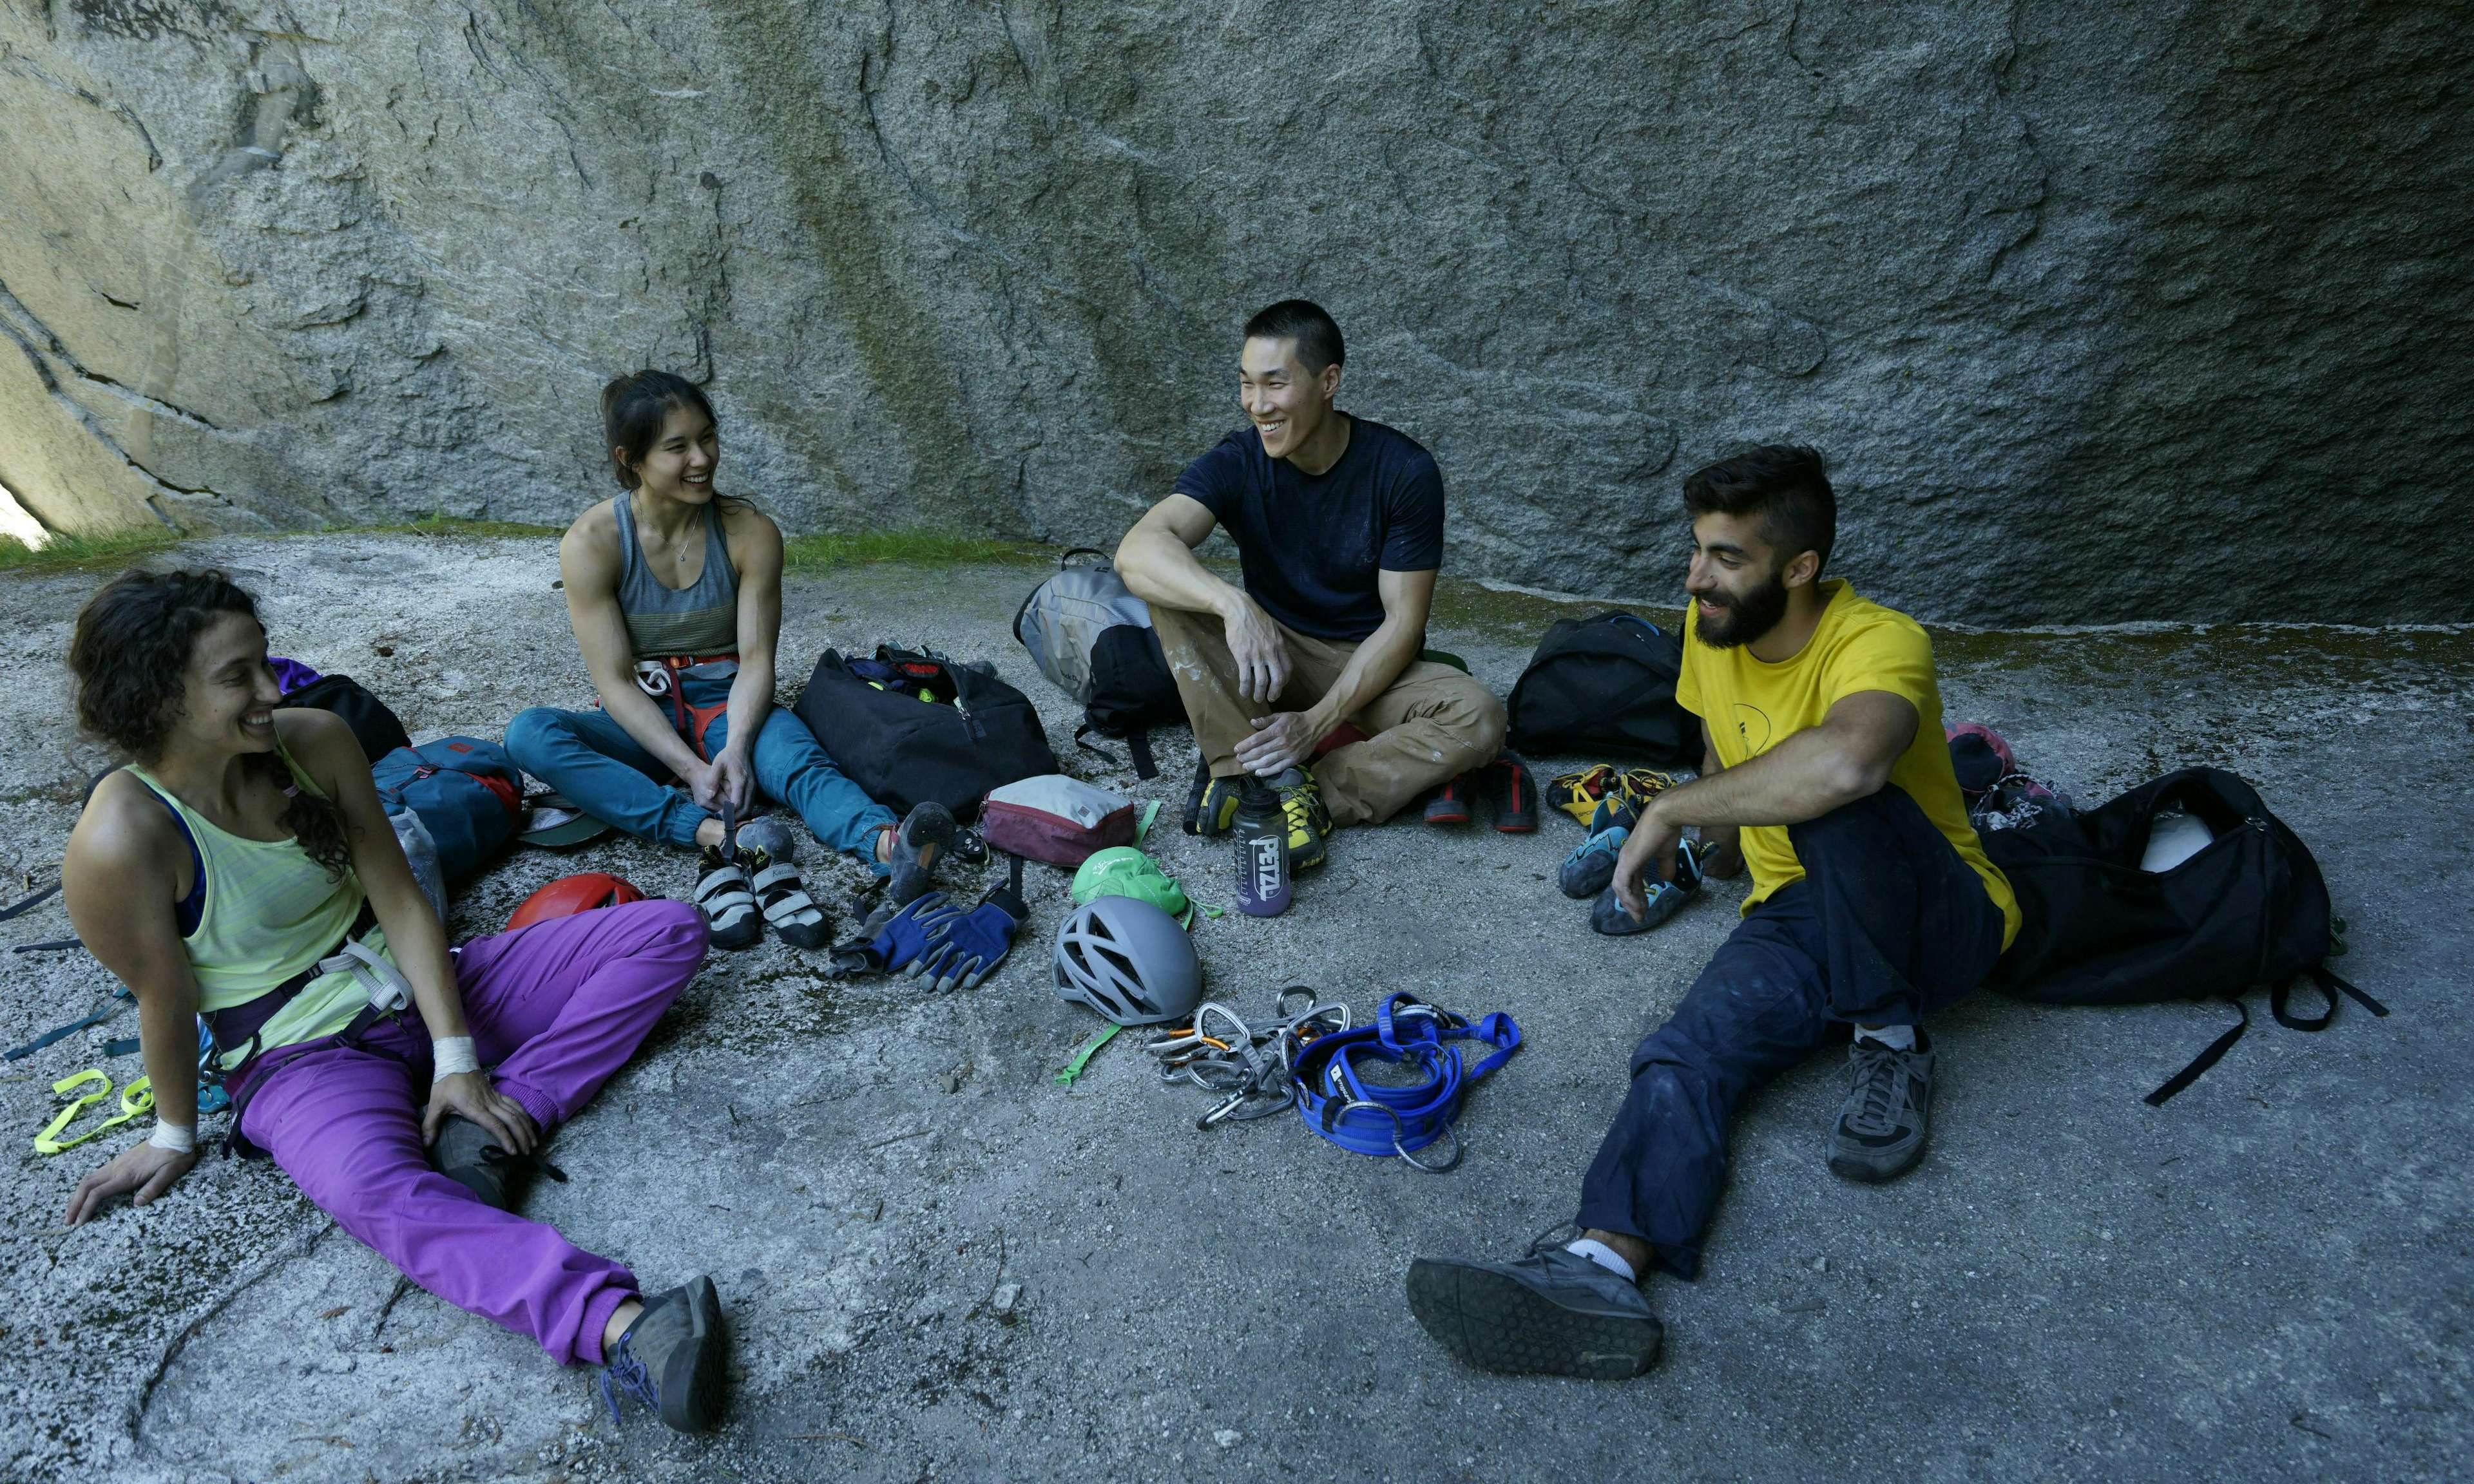 Group of climbers hanging out at the crag